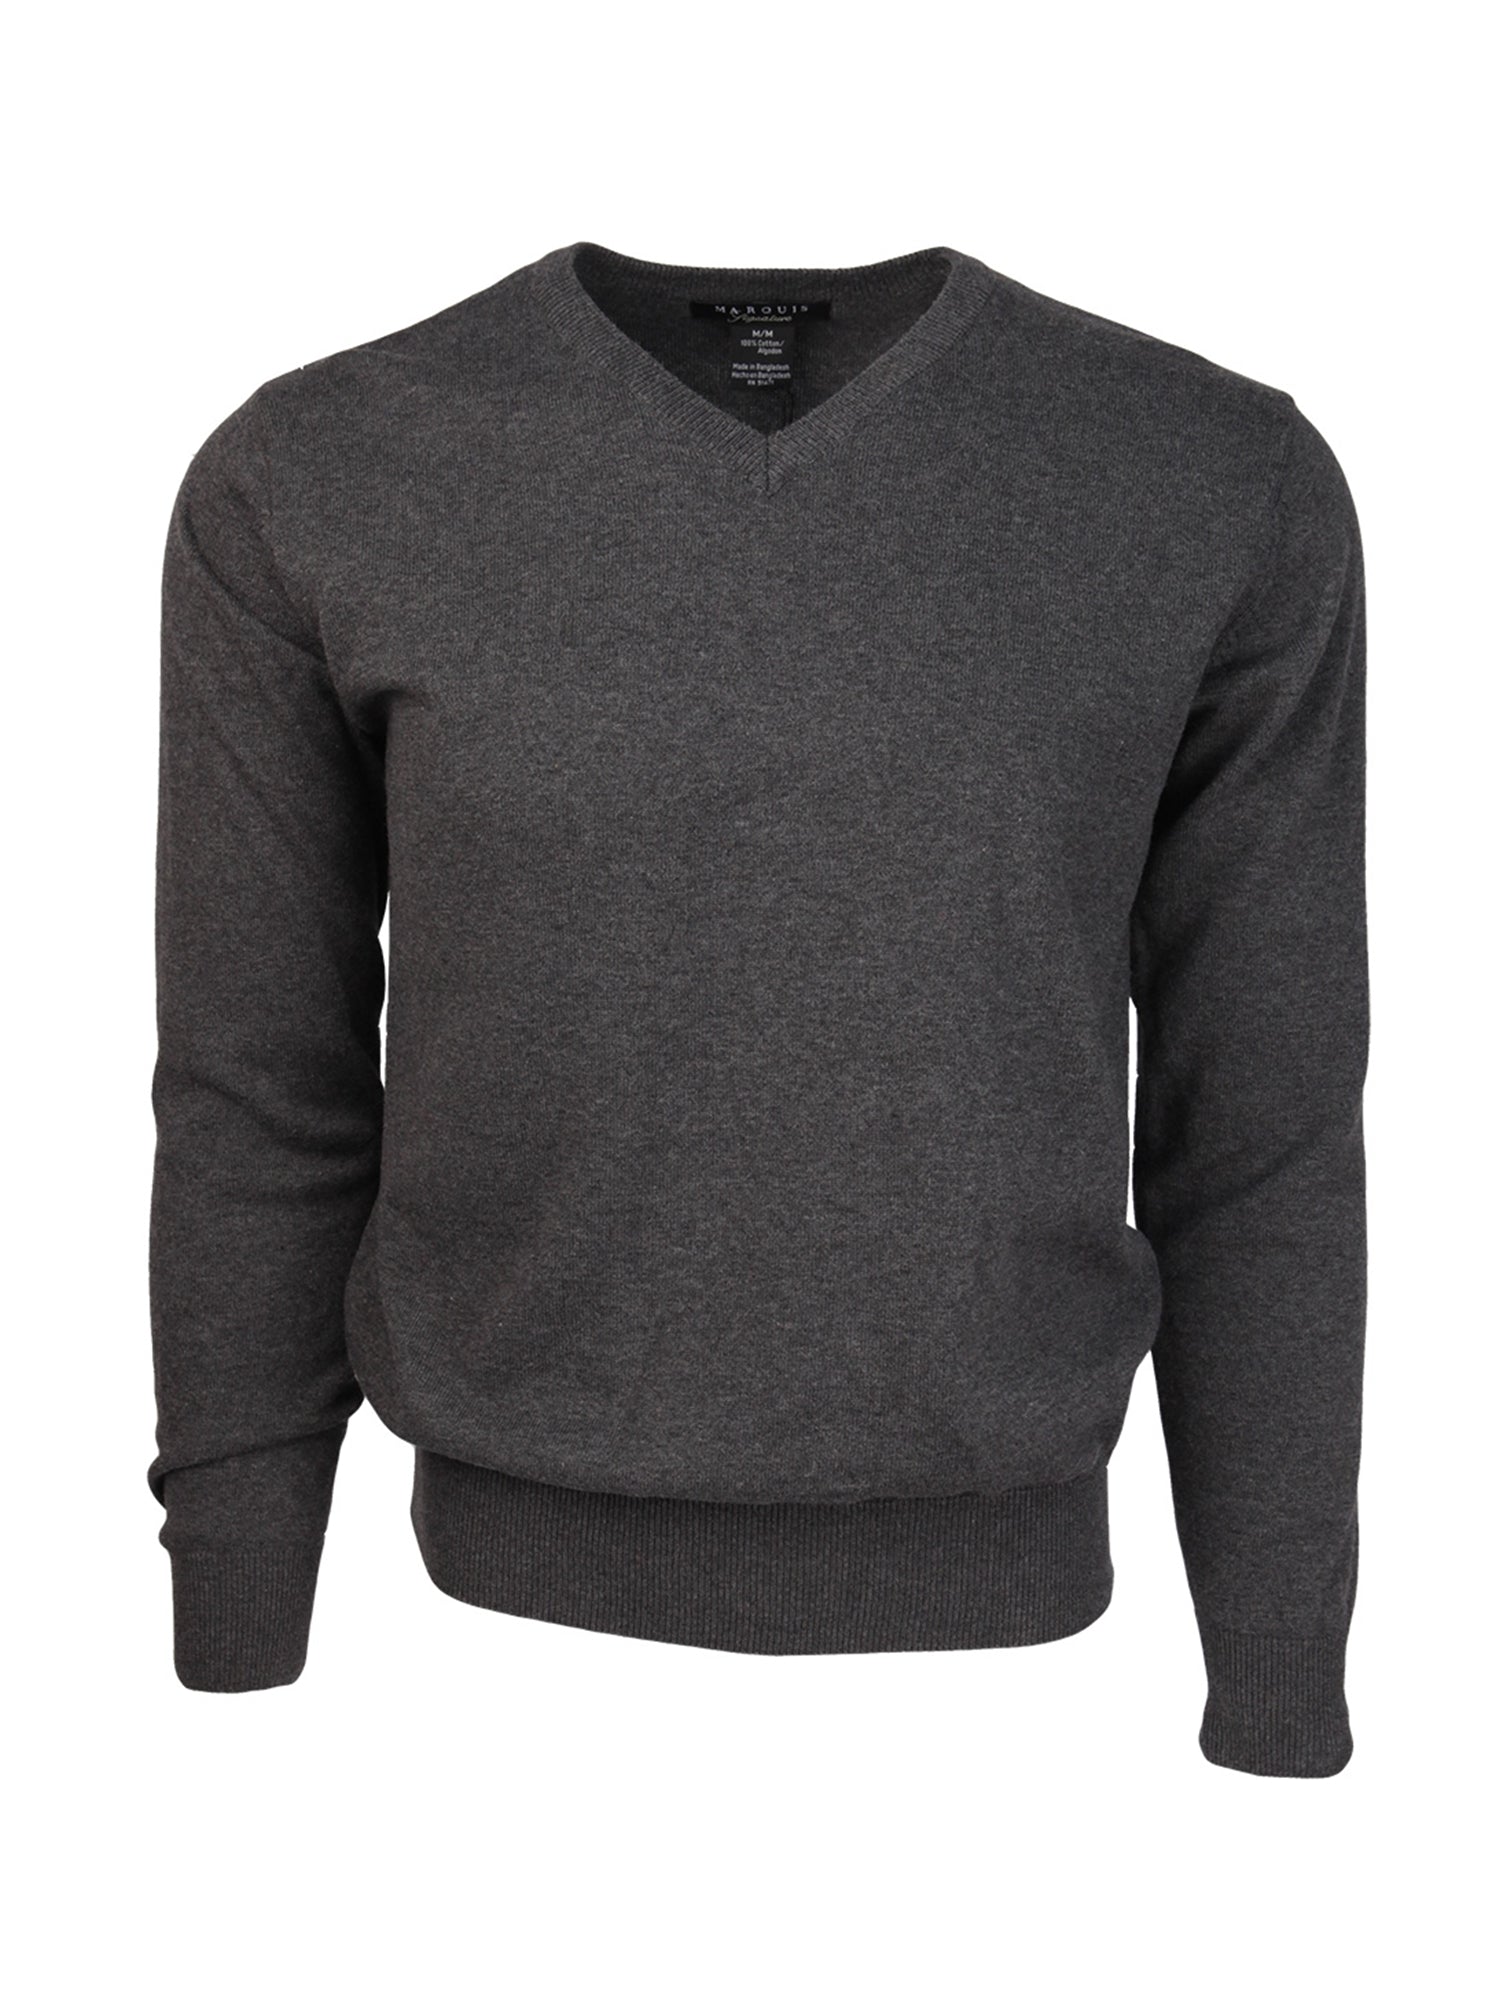 Marquis Men's Modern Fit Solid V-neck Cotton Sweater Sweater TheDapperTie Charcoal Small 